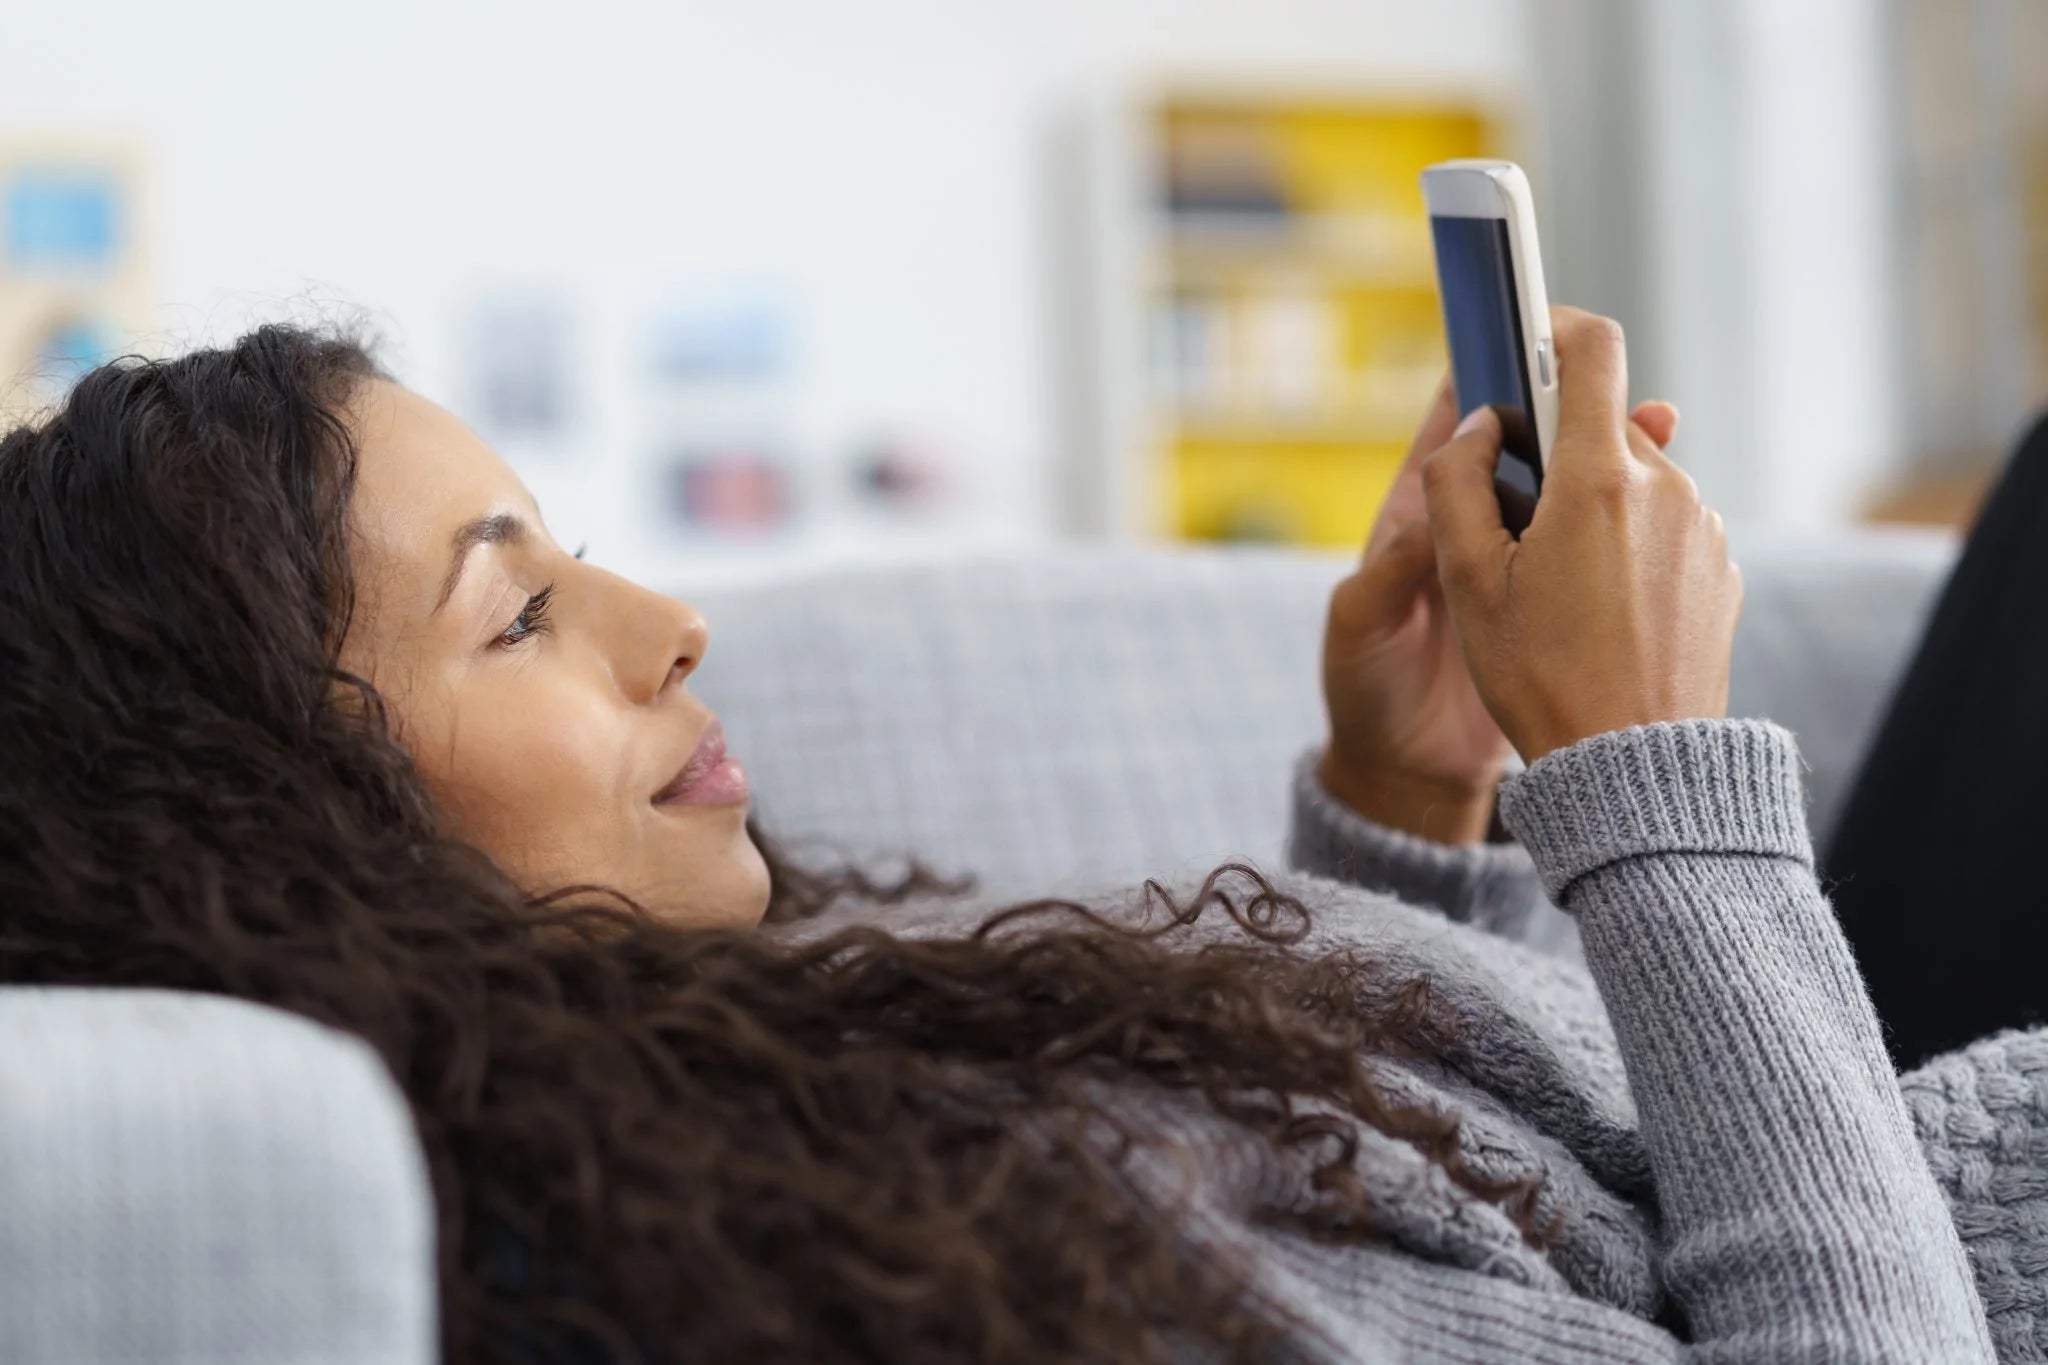 5 Secrets about Mobile Phones and your Skin